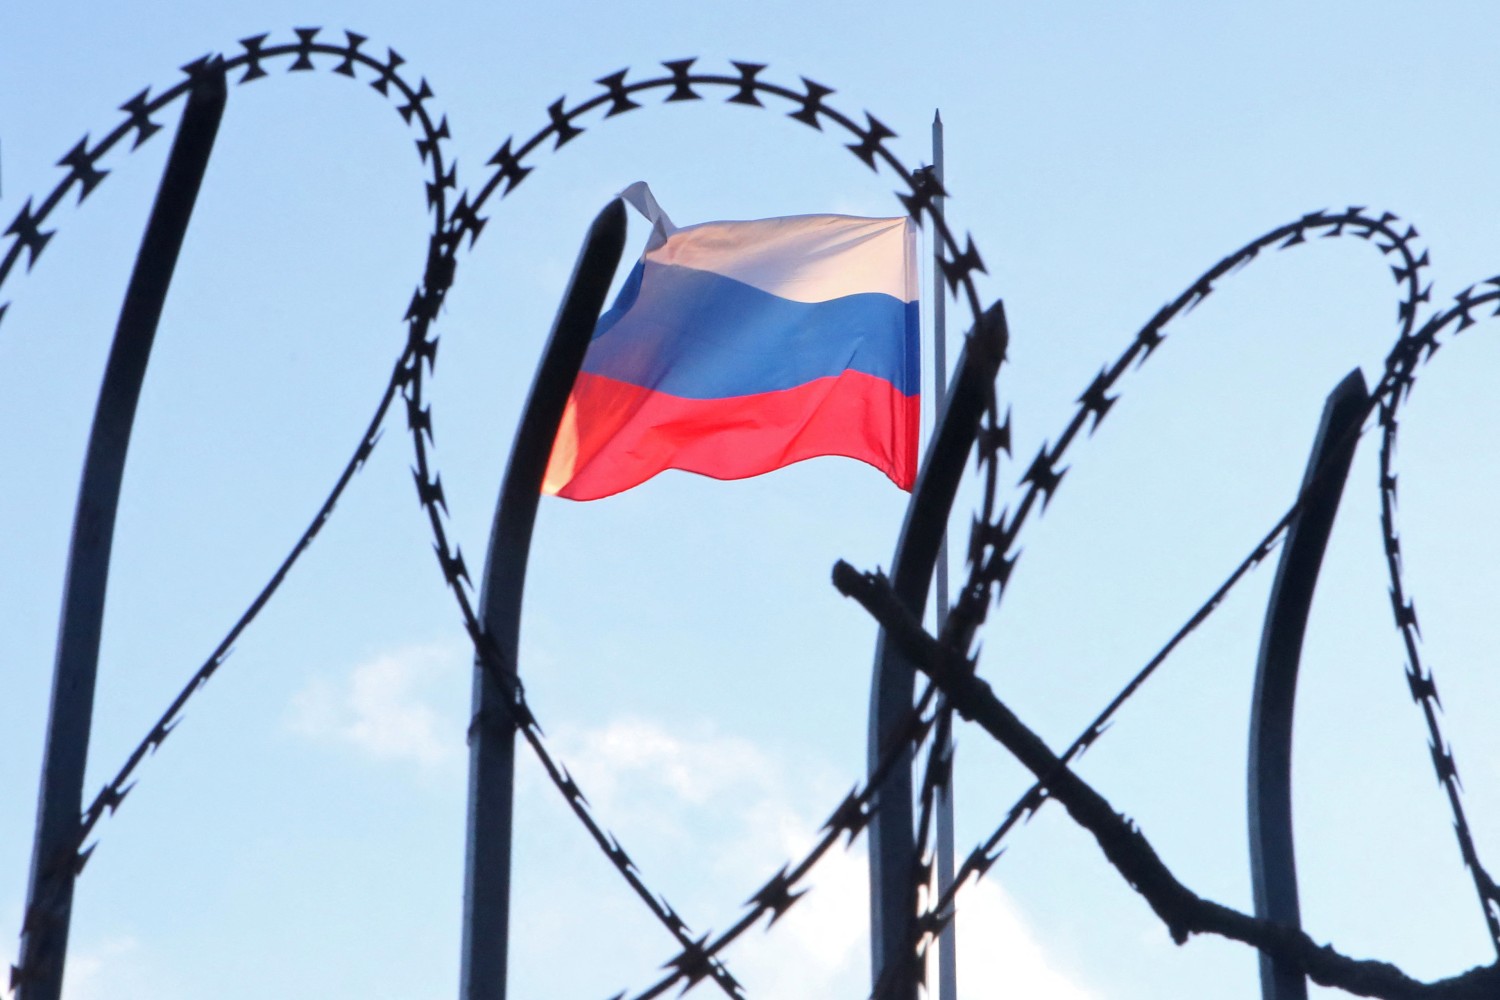 The Russian flag is seen behind a razor wire fence on the roof of the Russian Consulate General in Kharkiv, Ukraine February 23, 2022. Reuters/Vyacheslav Madiyevskyy